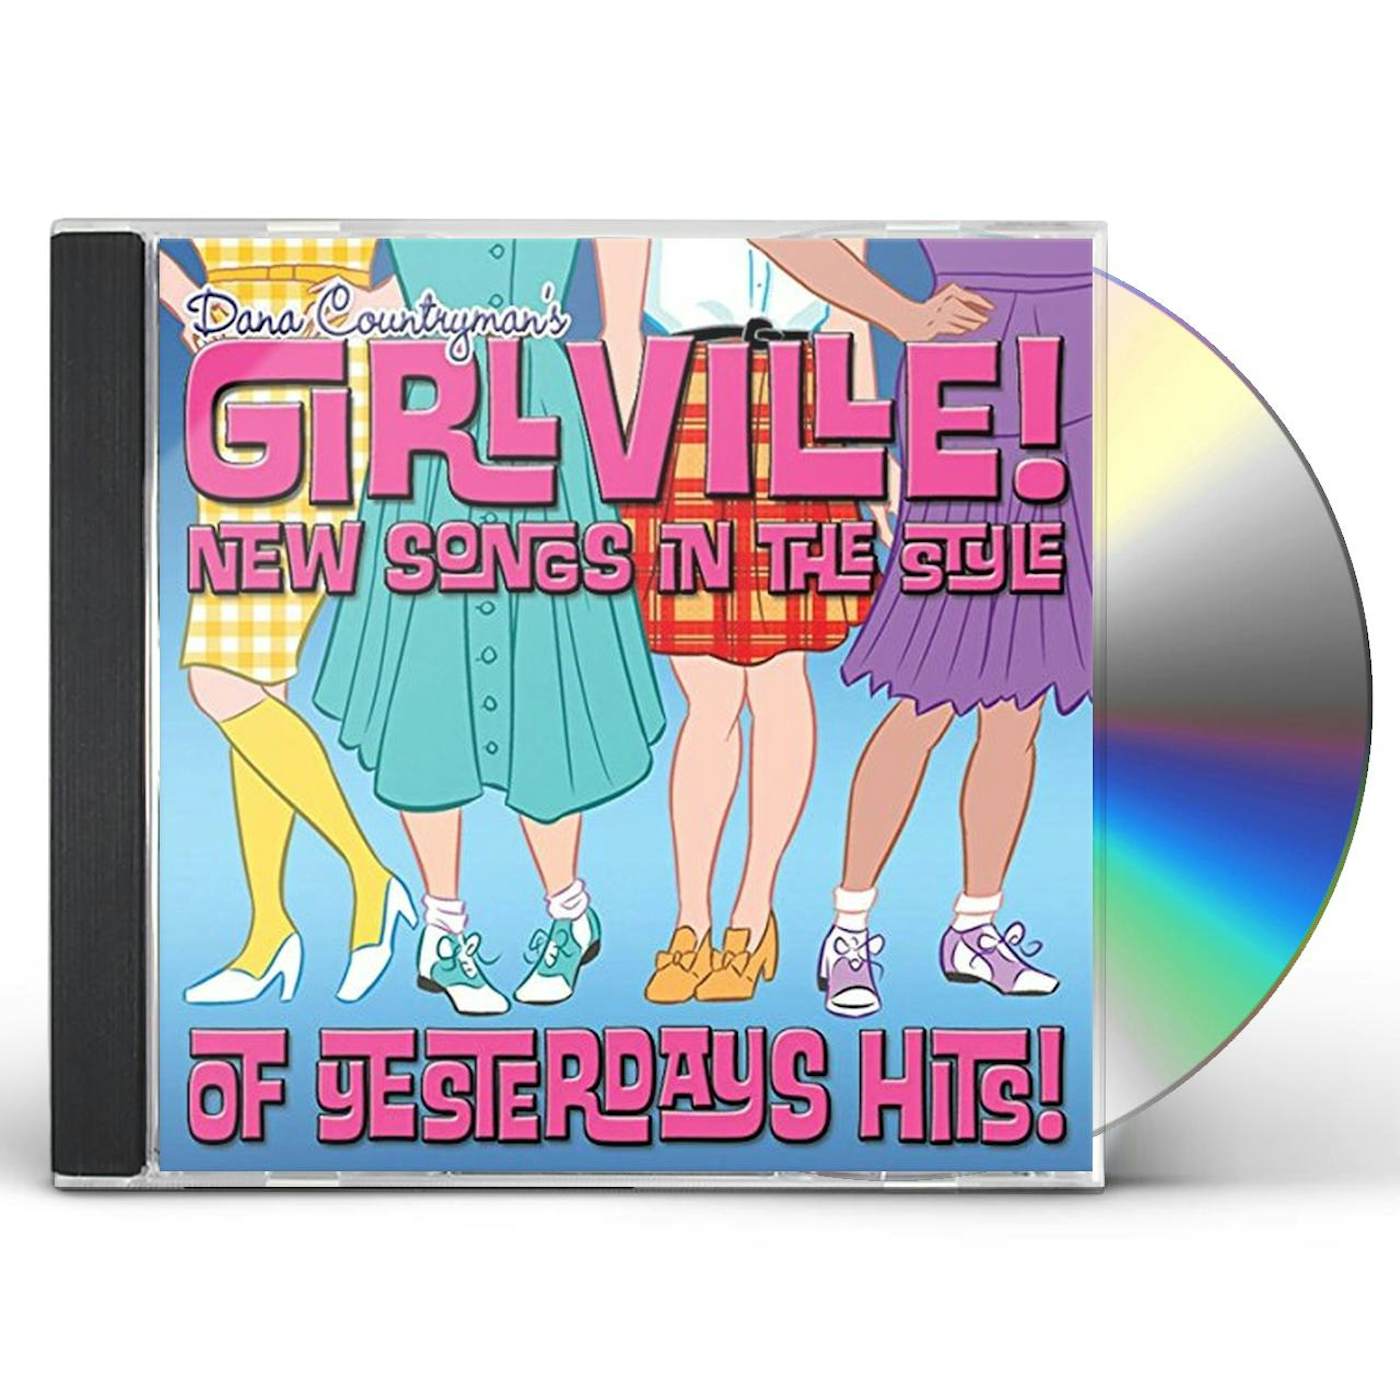 Dana Countryman GIRLVILLE: NEW SONGS IN THE STYLE OF YESTERDAYS CD